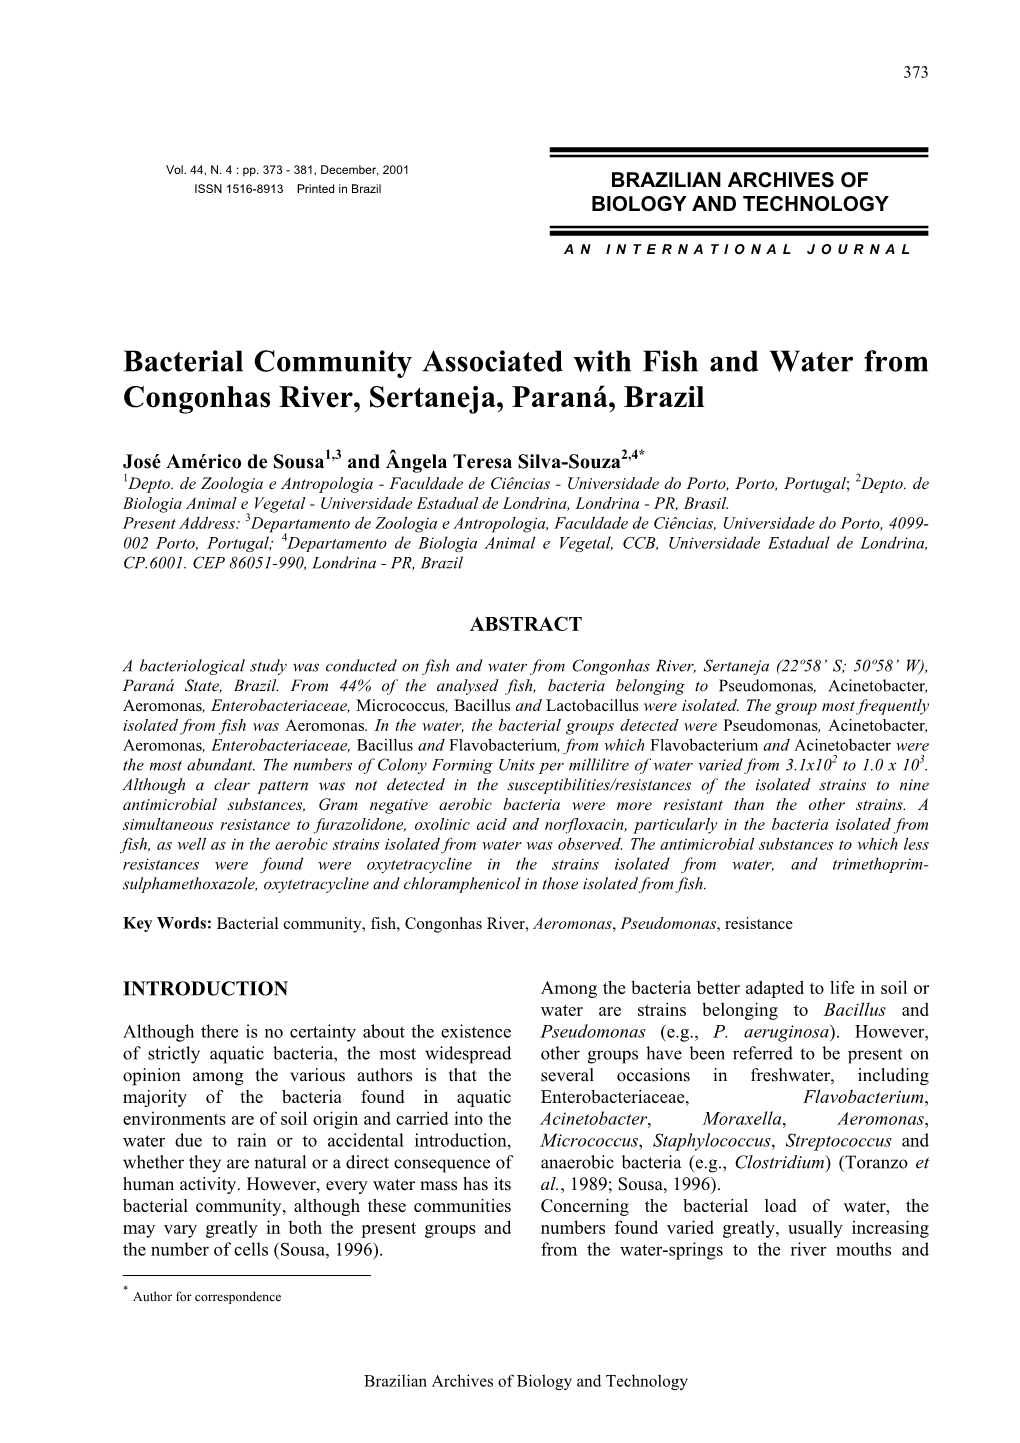 Bacterial Community Associated with Fish and Water from Congonhas River, Sertaneja, Paraná, Brazil